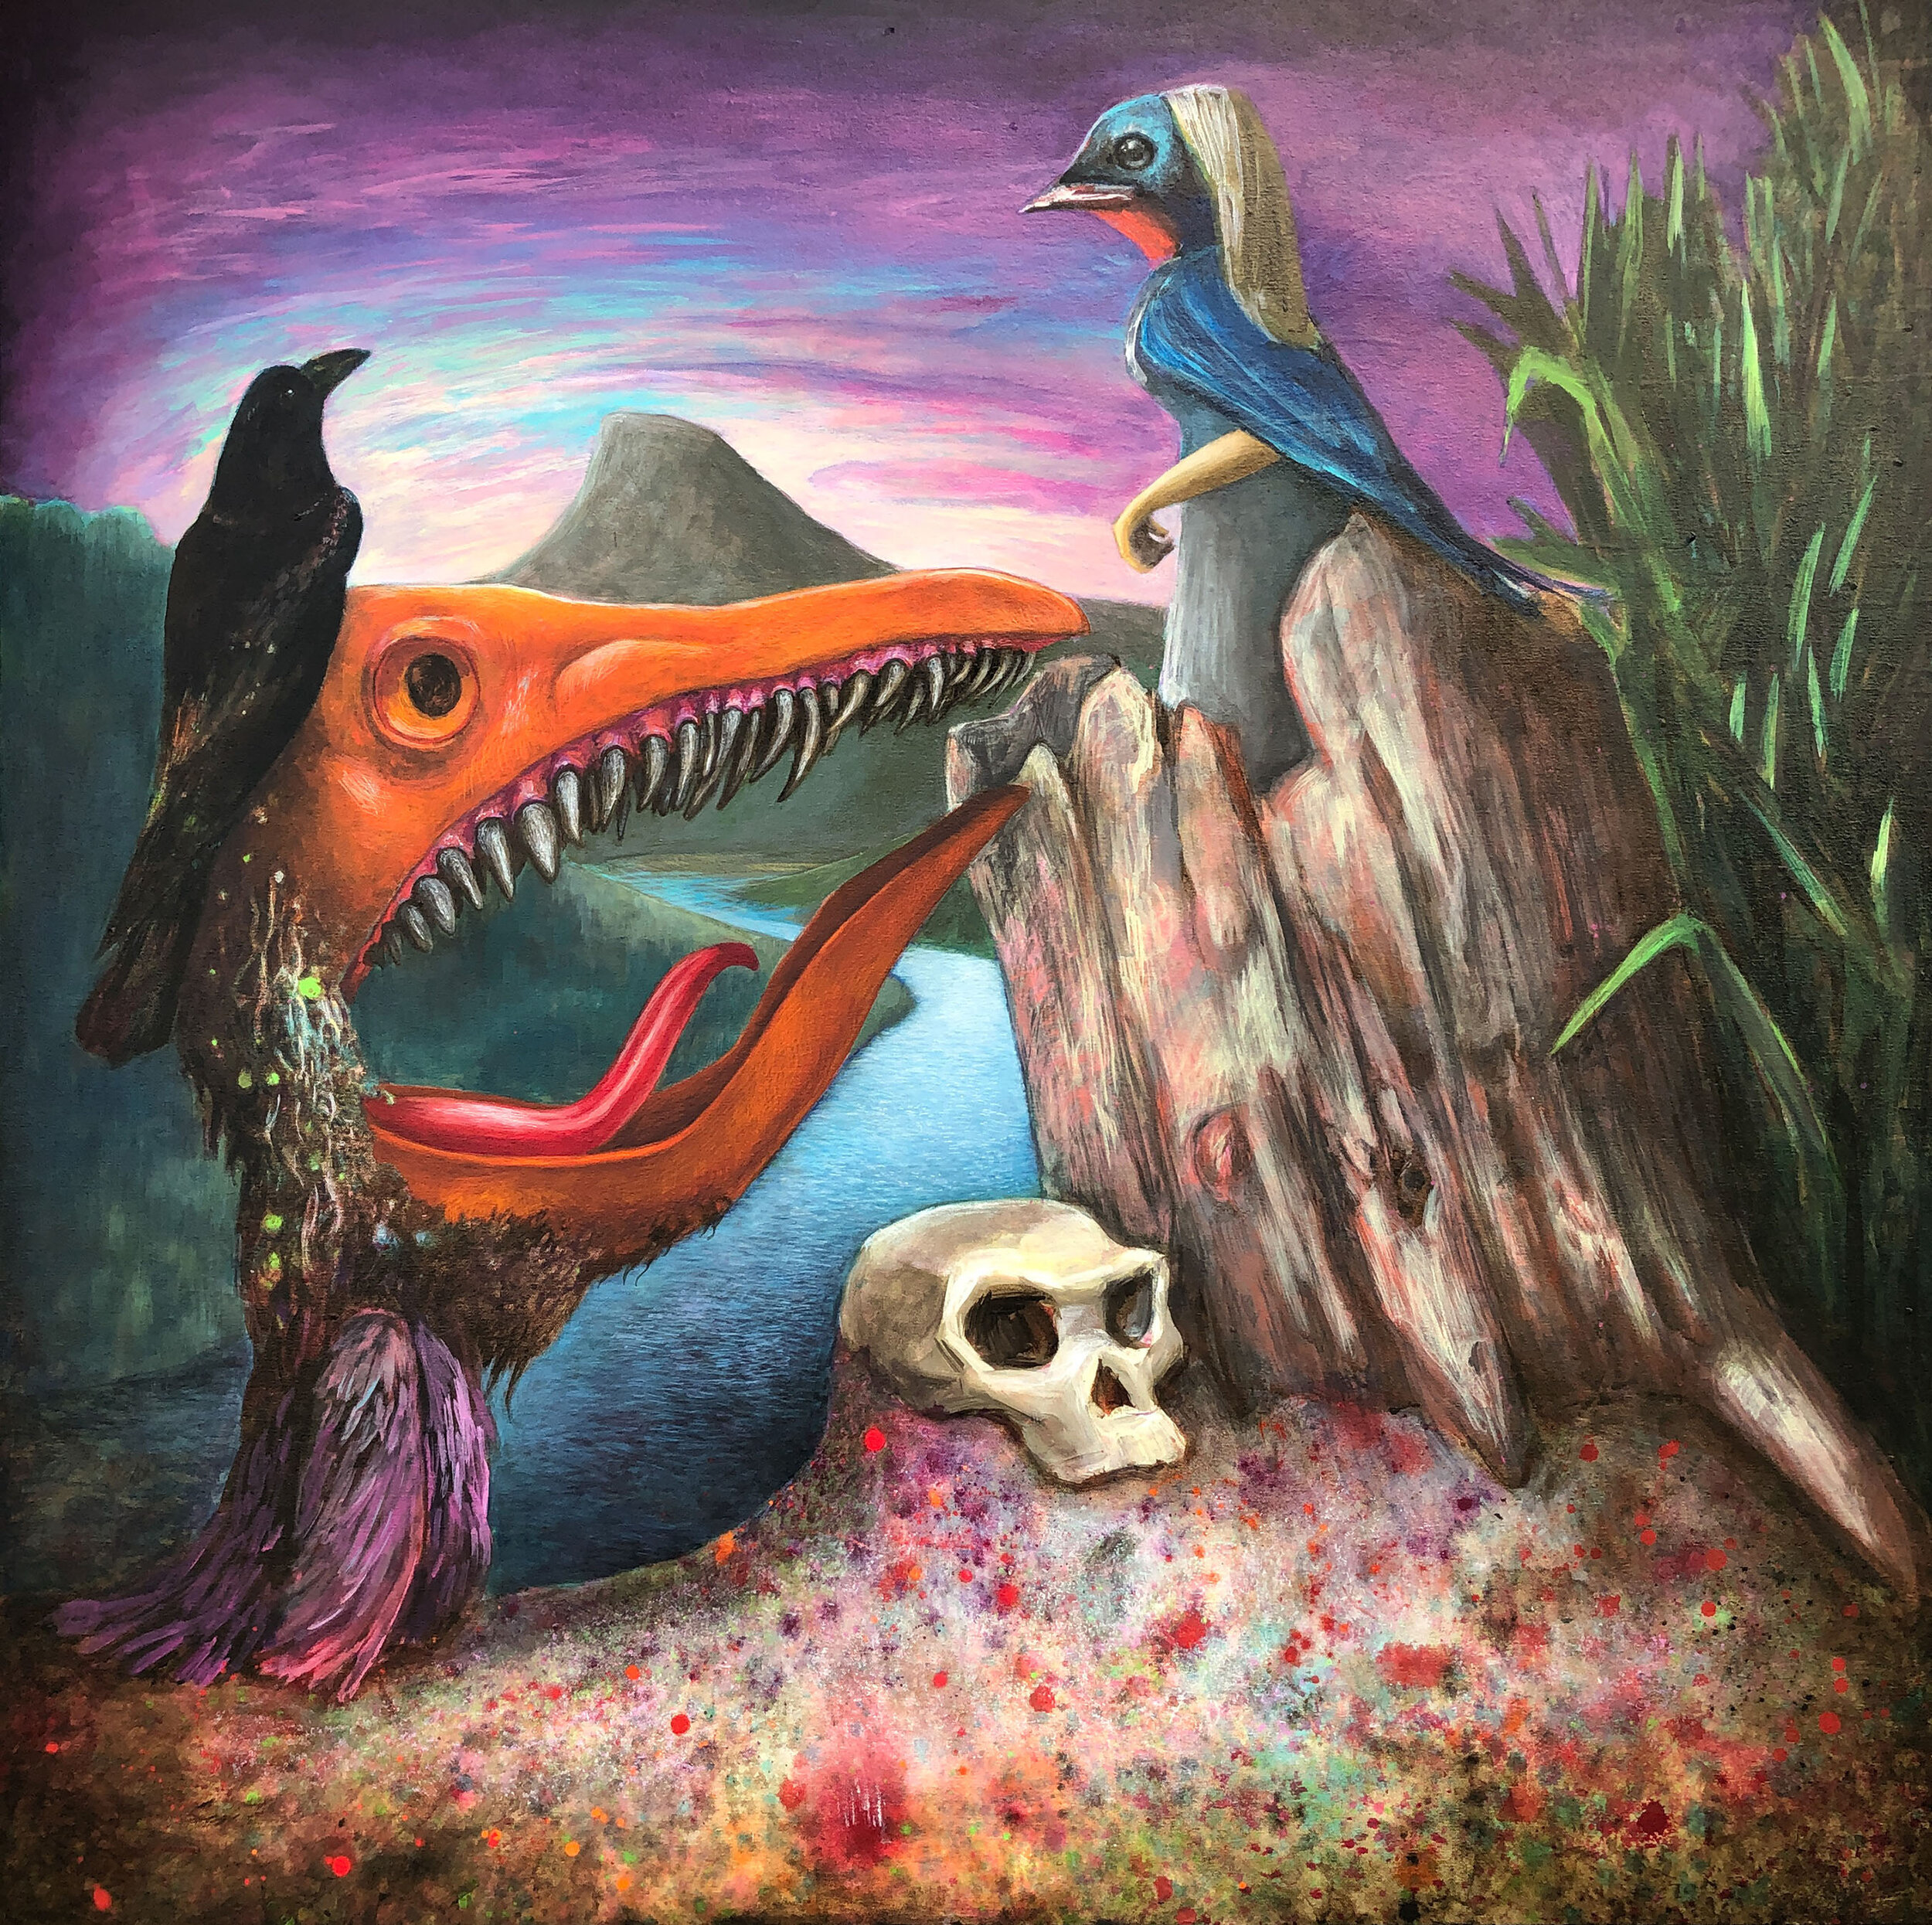 "The Crow and The Sparrow" (Aesop's Fable) 2020, 40" x 40" Acrylic on Stretched canvas 